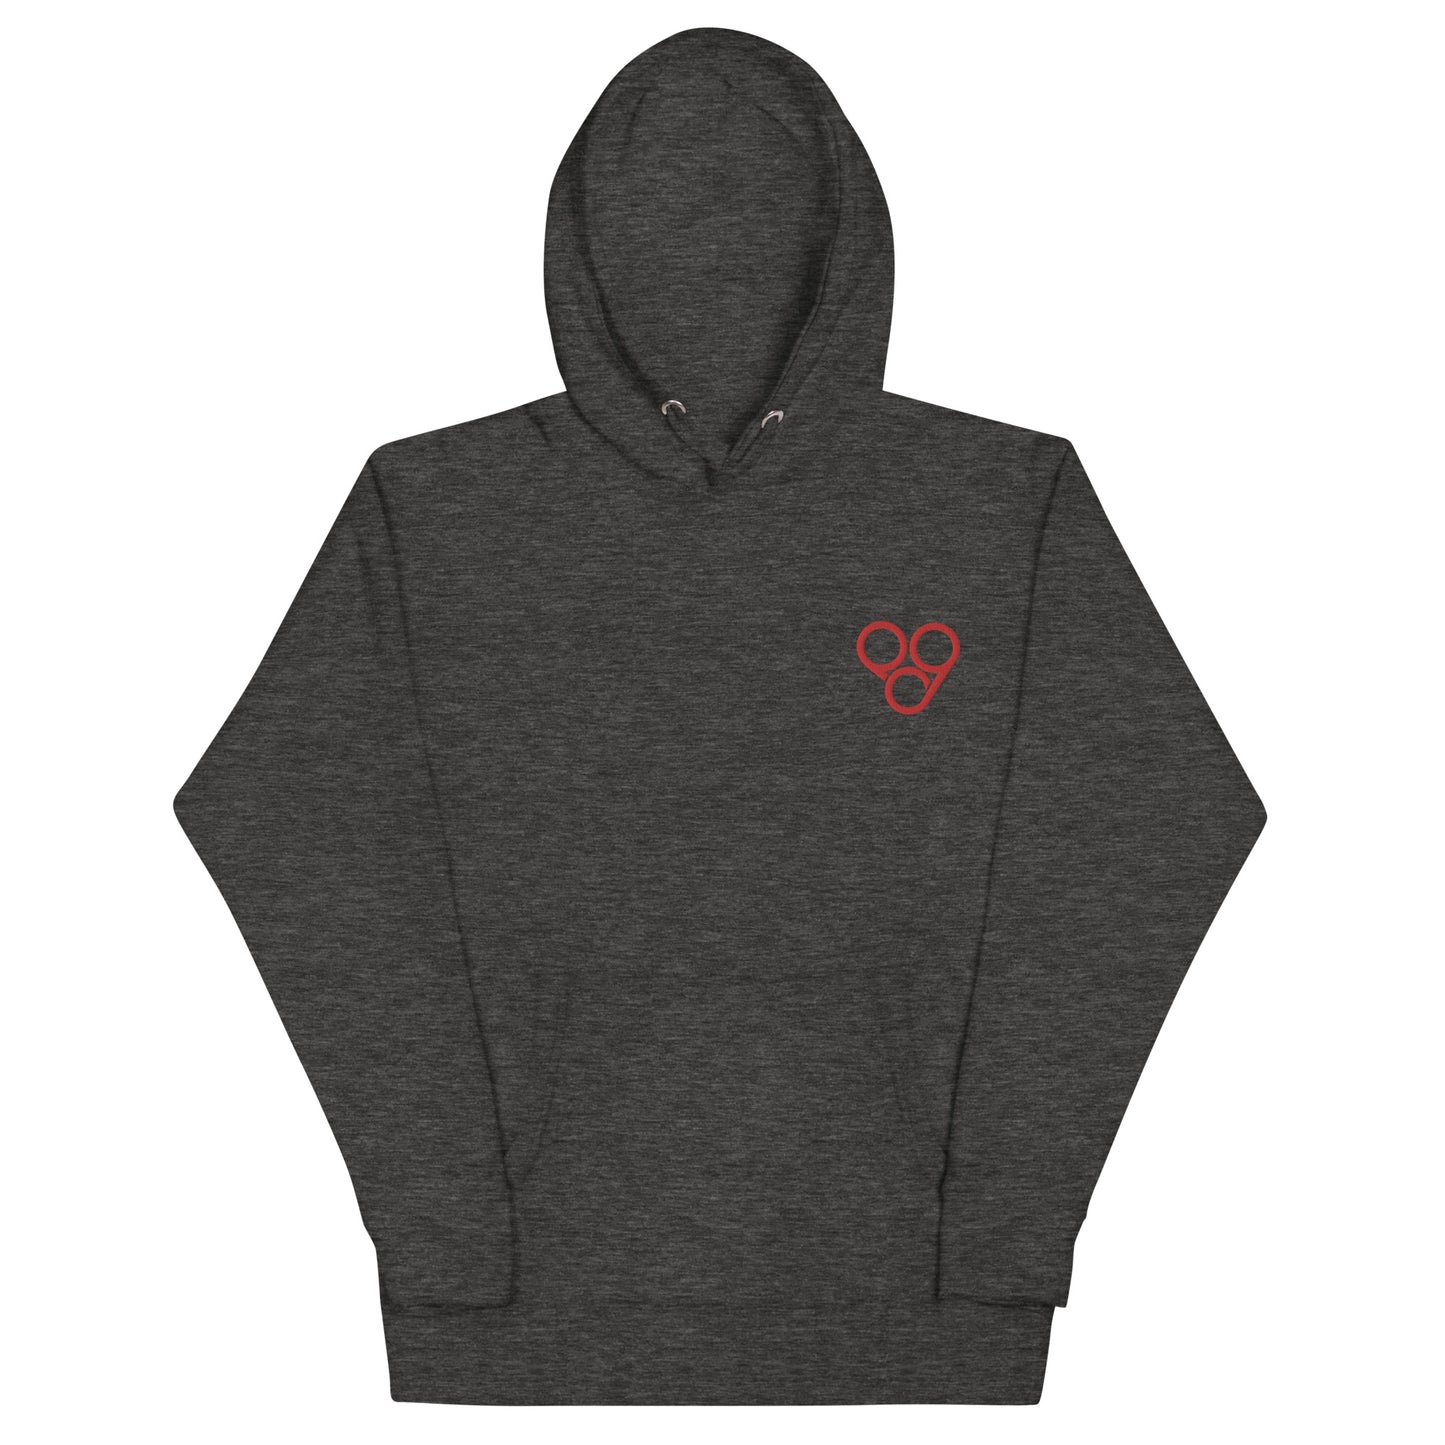 Landover Mall Stitched Unisex Hoodie - Red